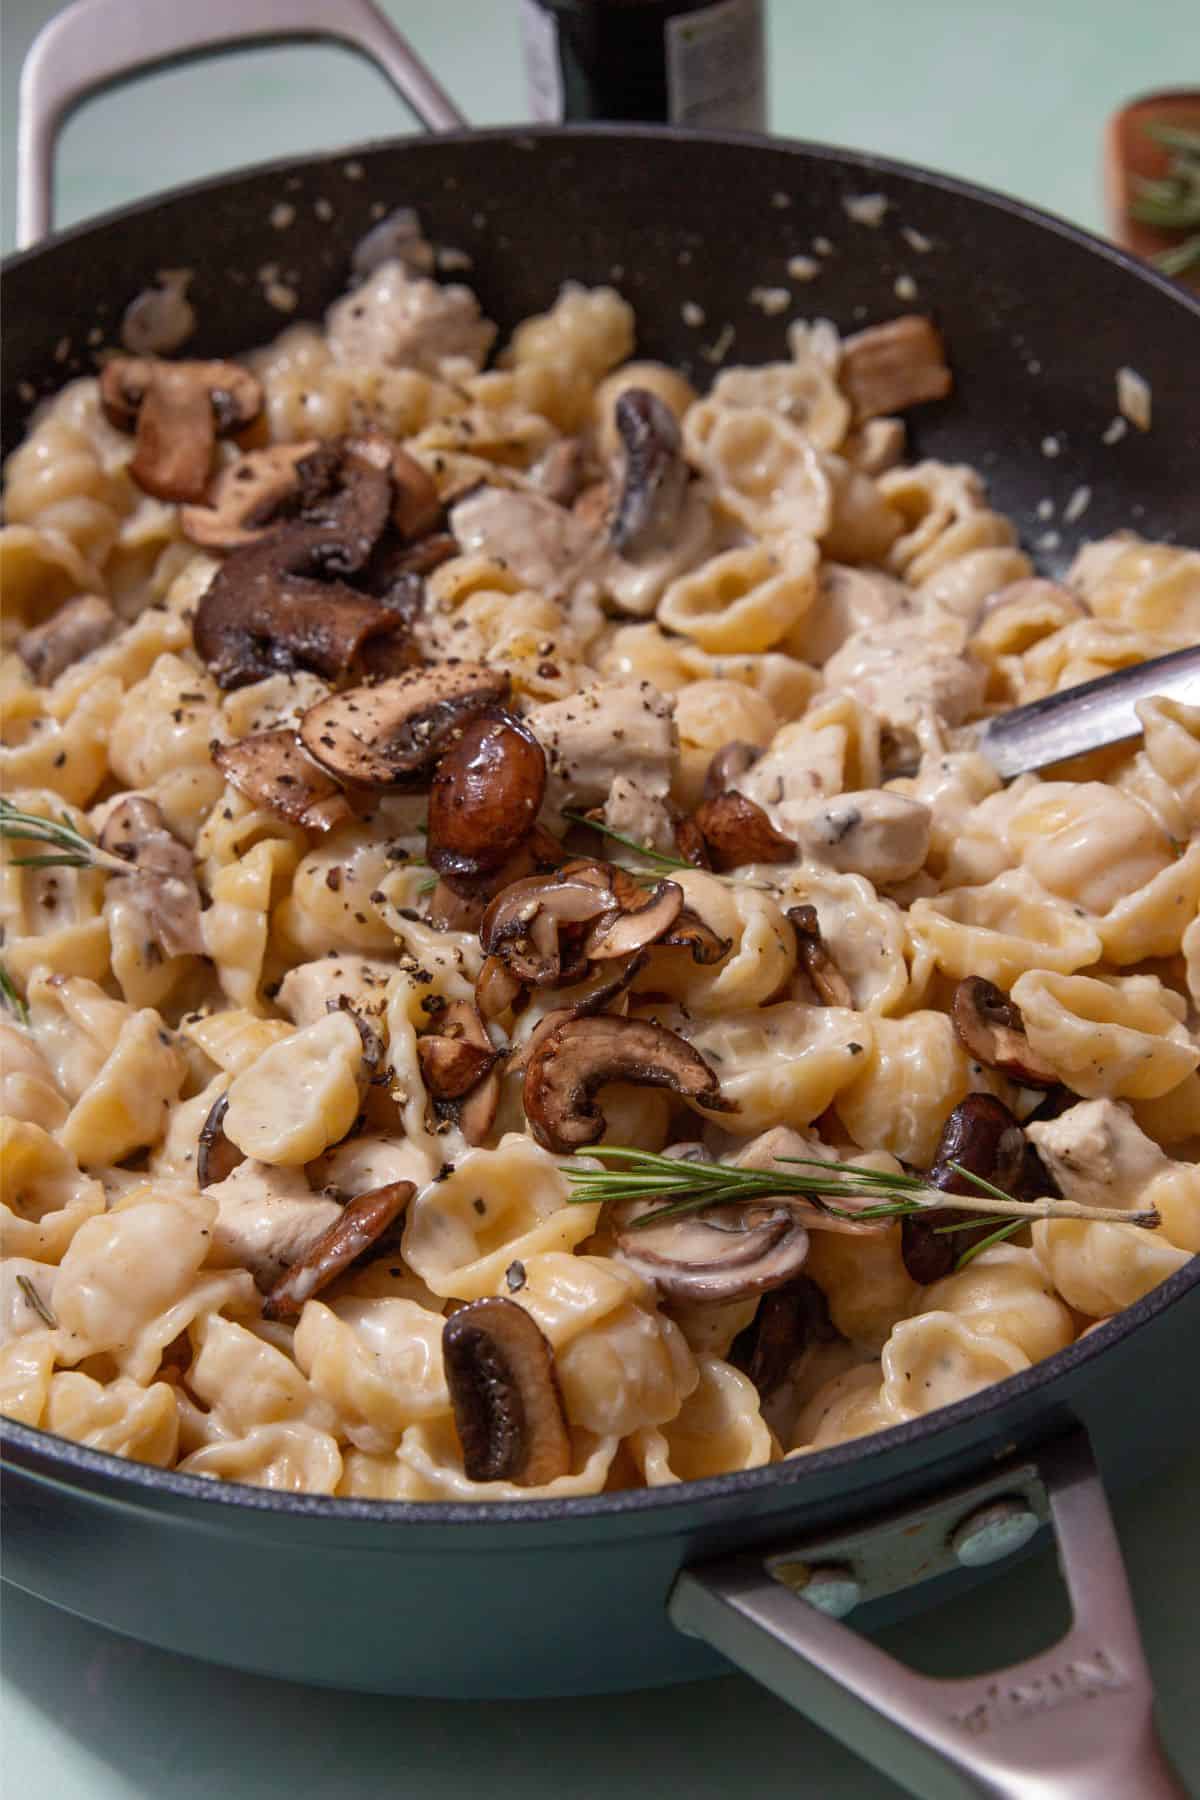 Pasta shells covered in a creamy sauce topped with mushrooms, seasoning and fresh rosemary in a large pan.